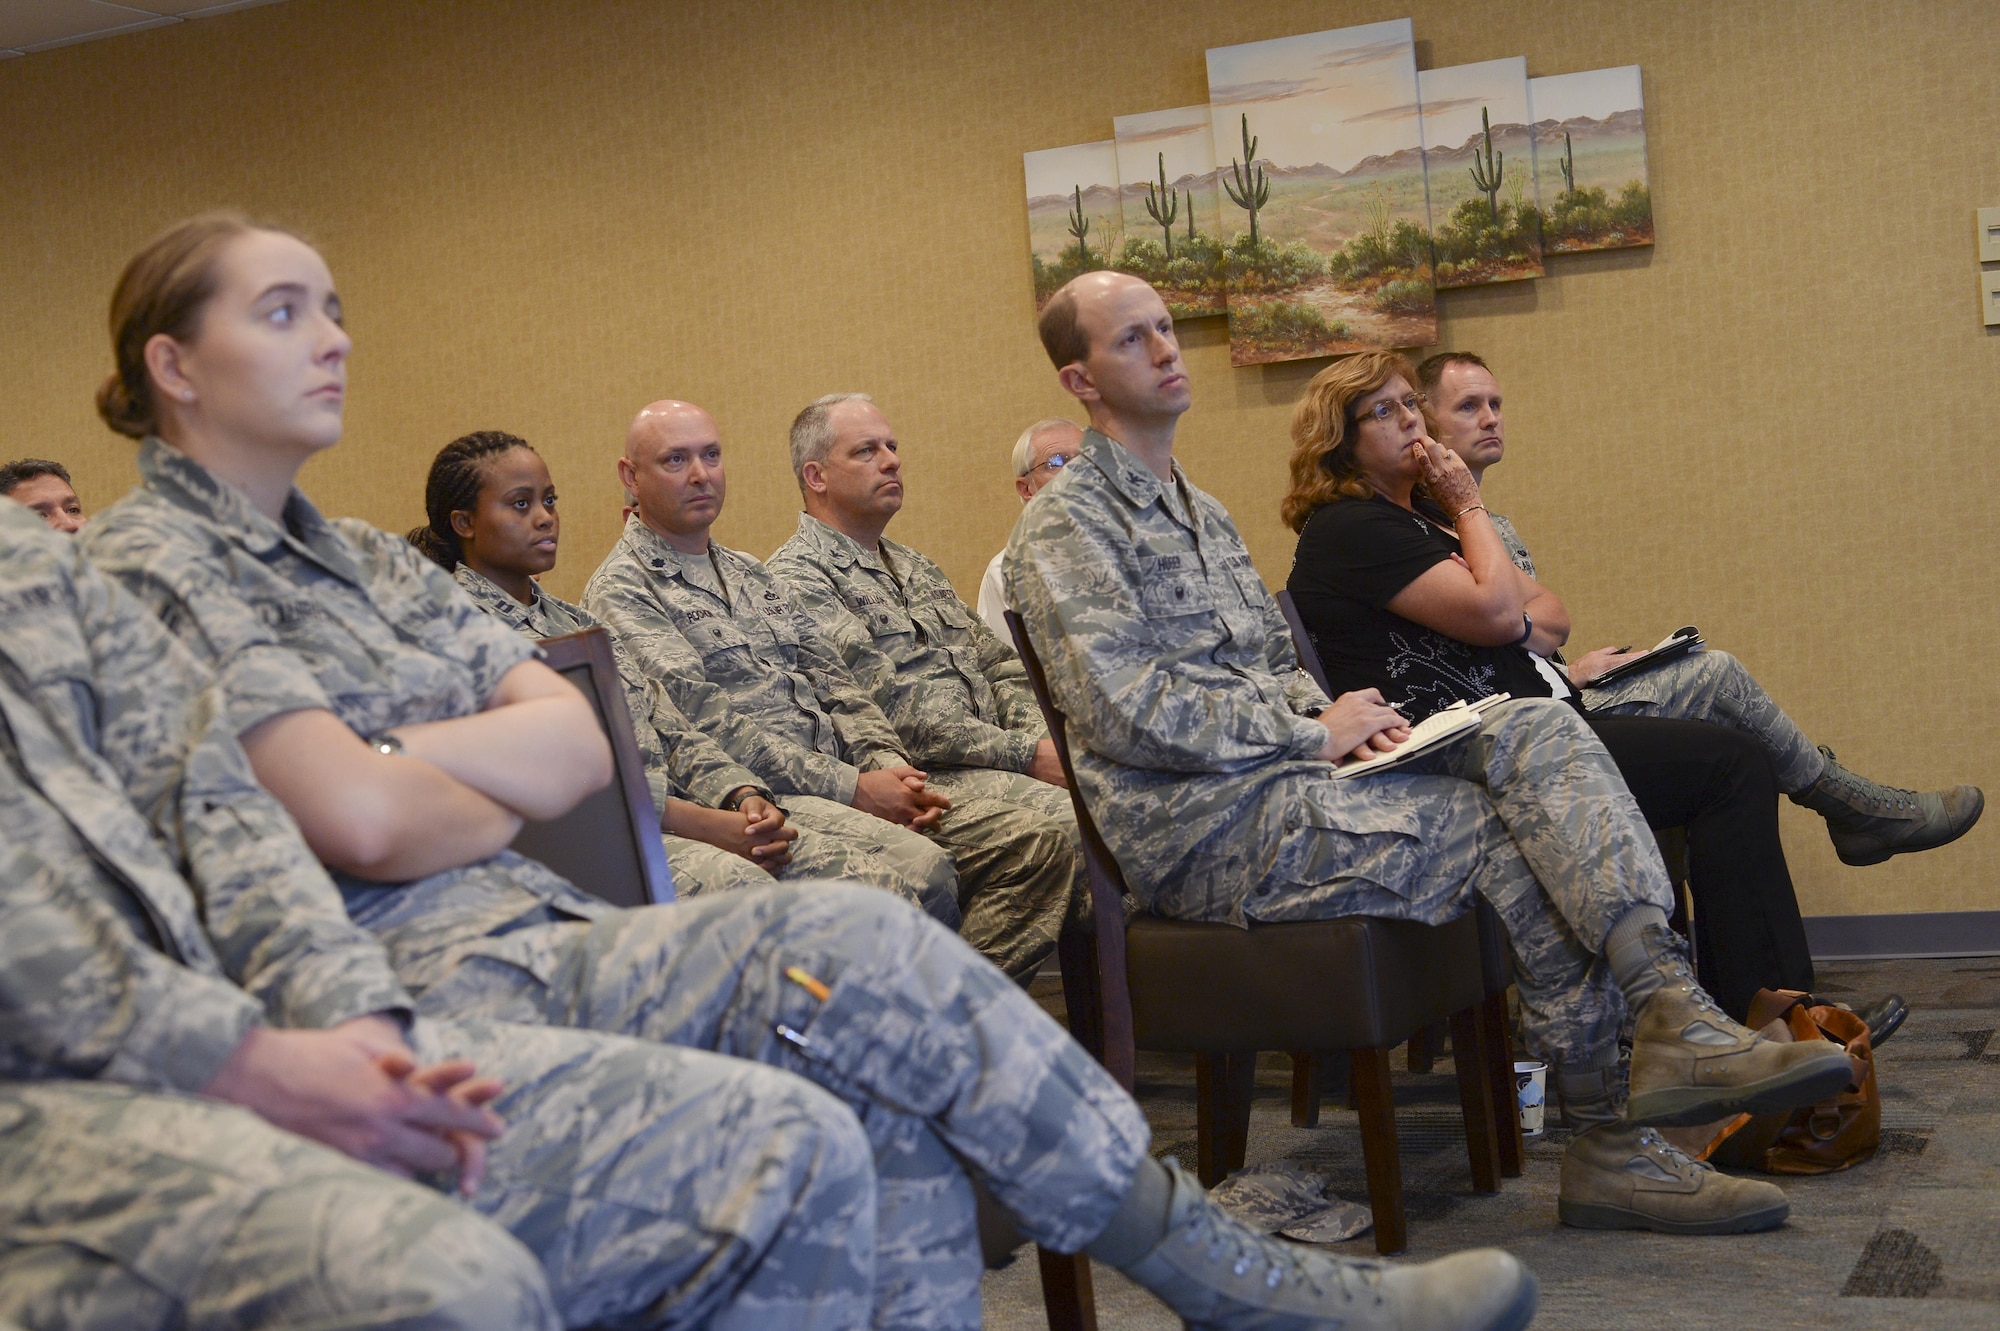 Members of 12th Air Force (Air Forces Southern) and University of Arizona listen as Colin Deeds, University of Arizona Latin American Studies Center assistant director, lectures during a speaker series event at Davis-Monthan Air Force Base, Ariz., June 19, 2017, for the 12th Air Force (Air Forces Southern) Academic Outreach Program with the University of Arizona. The Academic Outreach Program is modeled after U.S Southern Command’s partnership with Florida International University. (U.S. Air Force photo by Staff Sgt. Angela Ruiz)